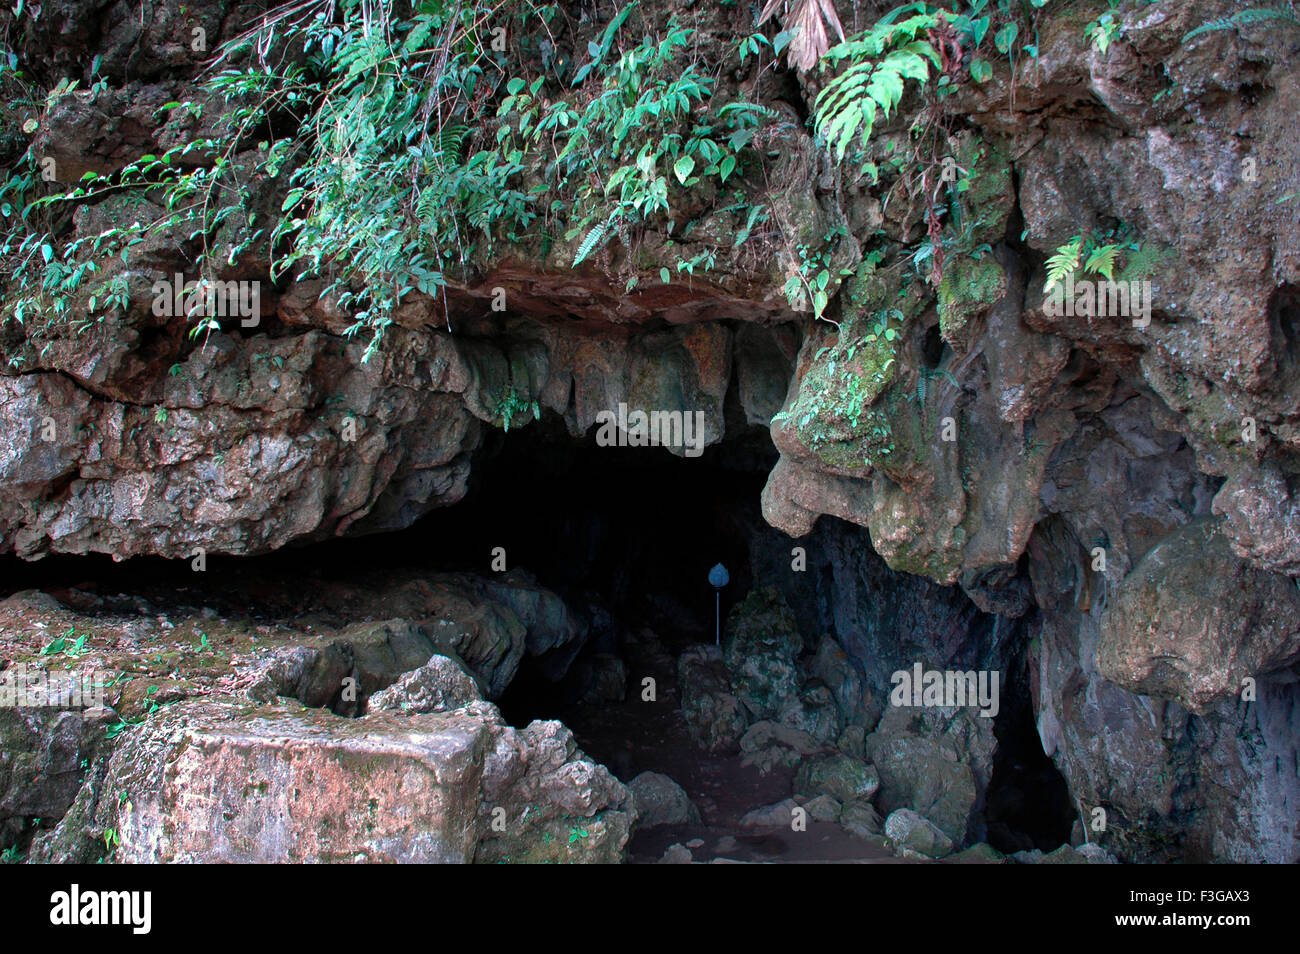 Treasure Trail continues in Monster's Lair at Mawsmai caves, Meghalaya -  Thrilling Travel